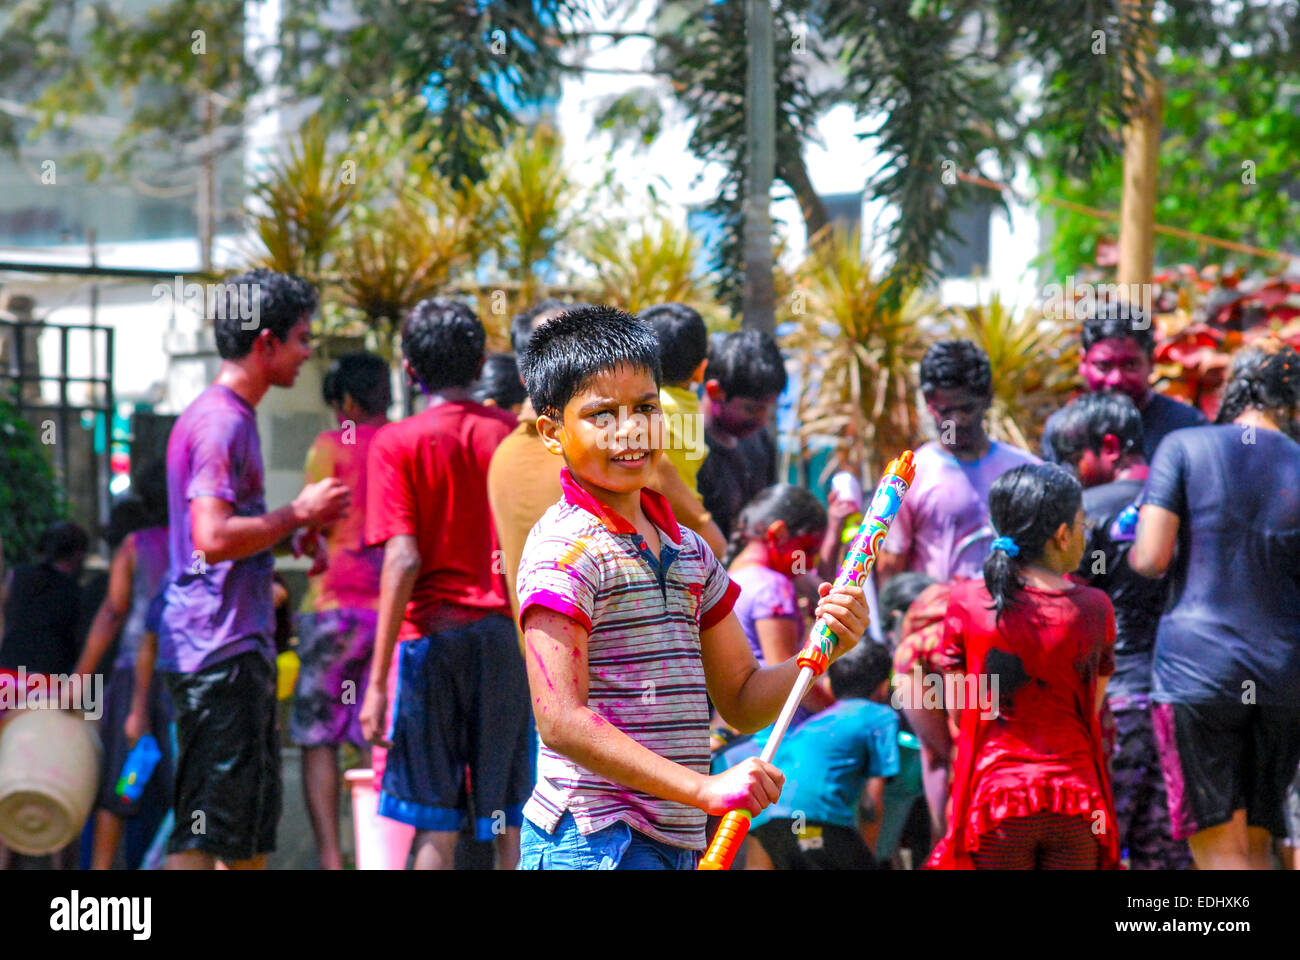 Group of people playing with powder colors & water during the spring hindu festival Holi also known as a festival of colors. Stock Photo